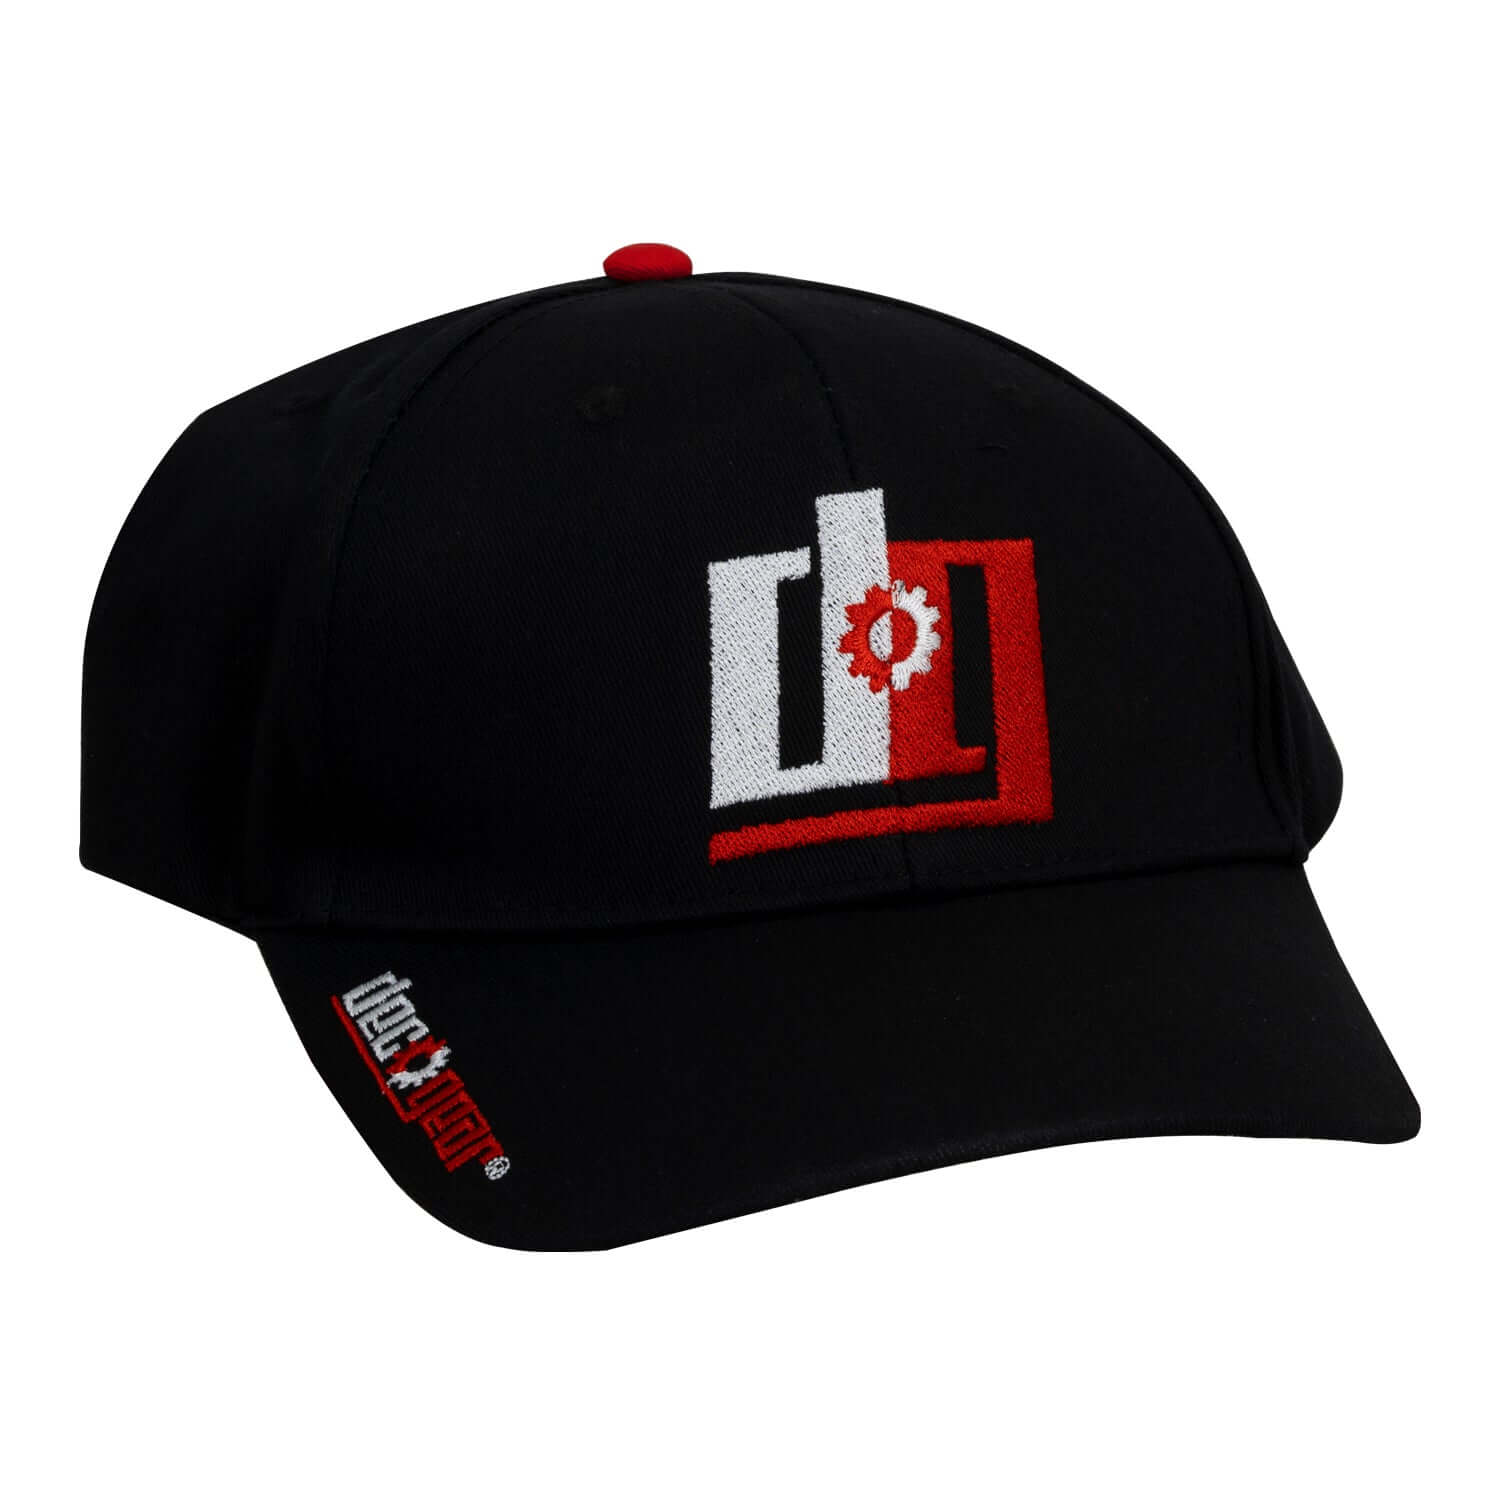 Cap - Black and Red